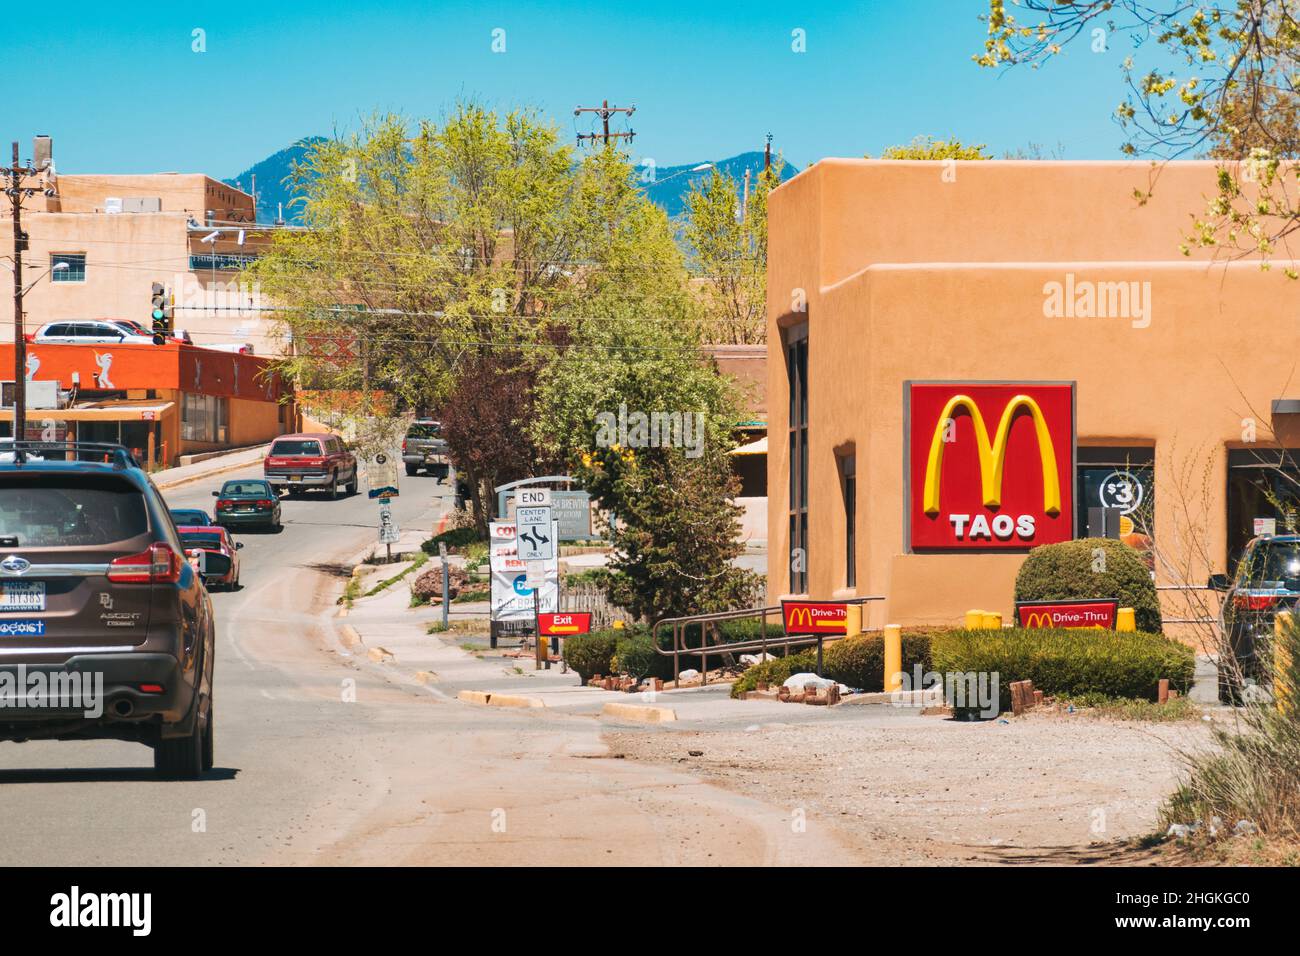 a McDonald's restaurant sign in Taos, this fast food chain location is housed in a traditional adobe styled building Stock Photo